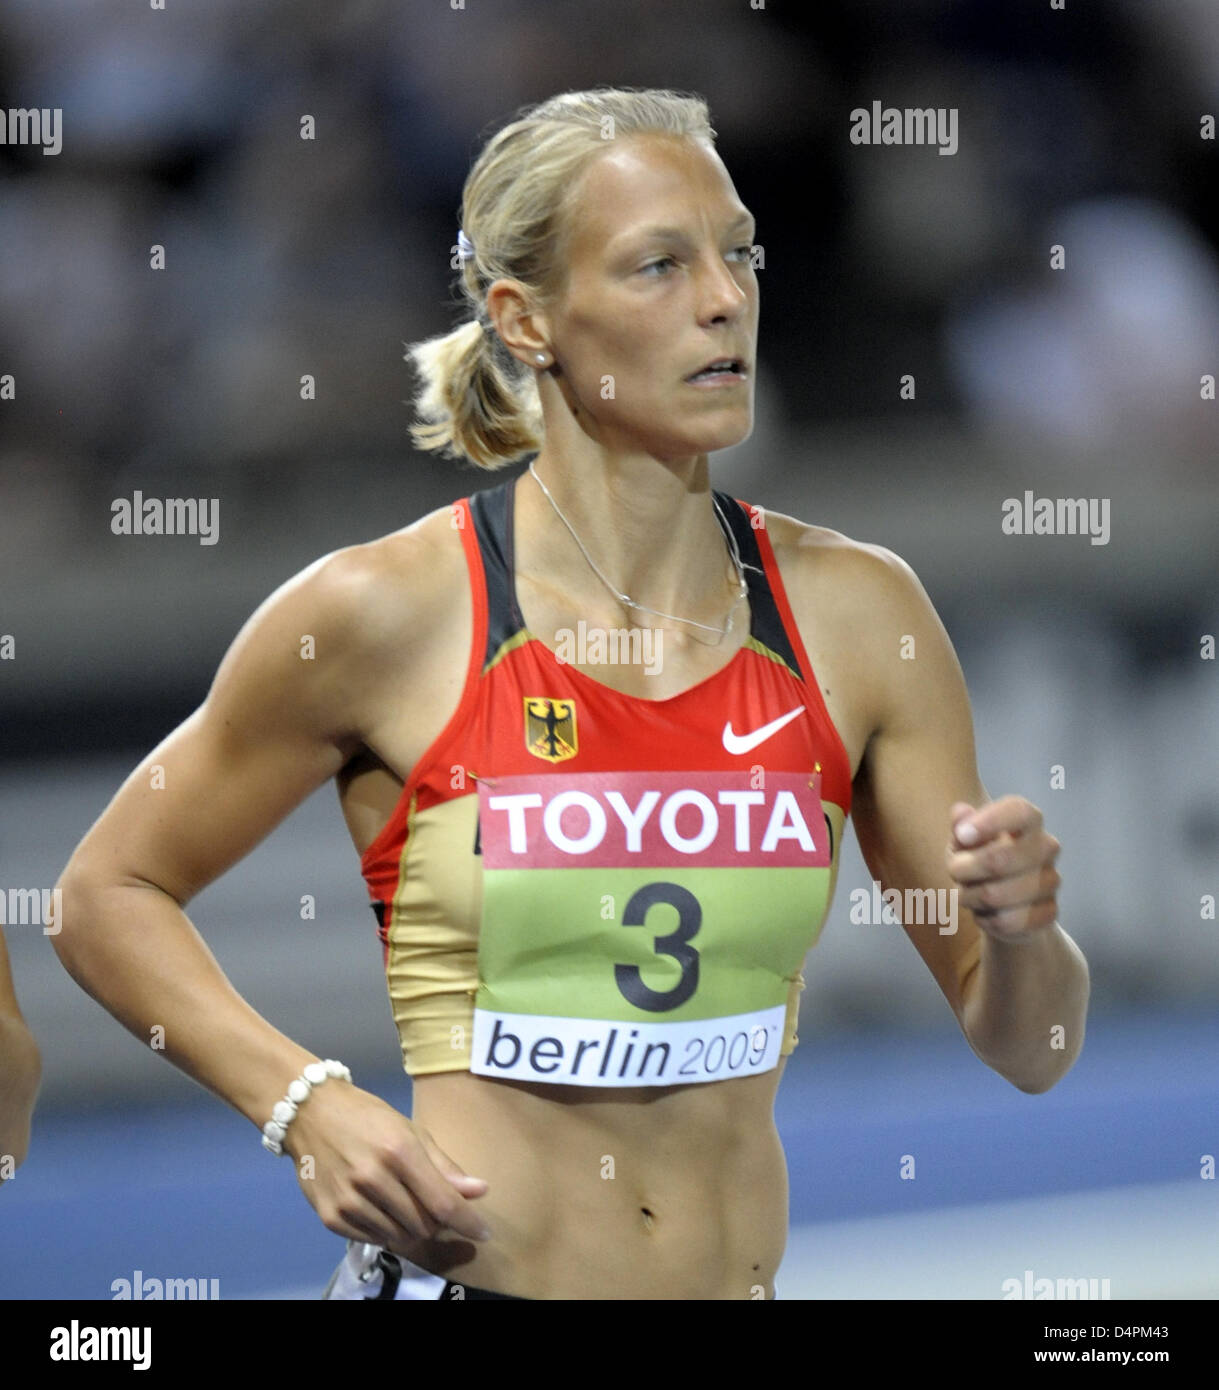 German Jennifer Oeser shown in action during the final 800m competition of the heptathlon at the 12th IAAF World Championships in Athletics in Berlin, Germany, 16 August 2009. Oeser won the silver medal. Photo: HANNIBAL Stock Photo